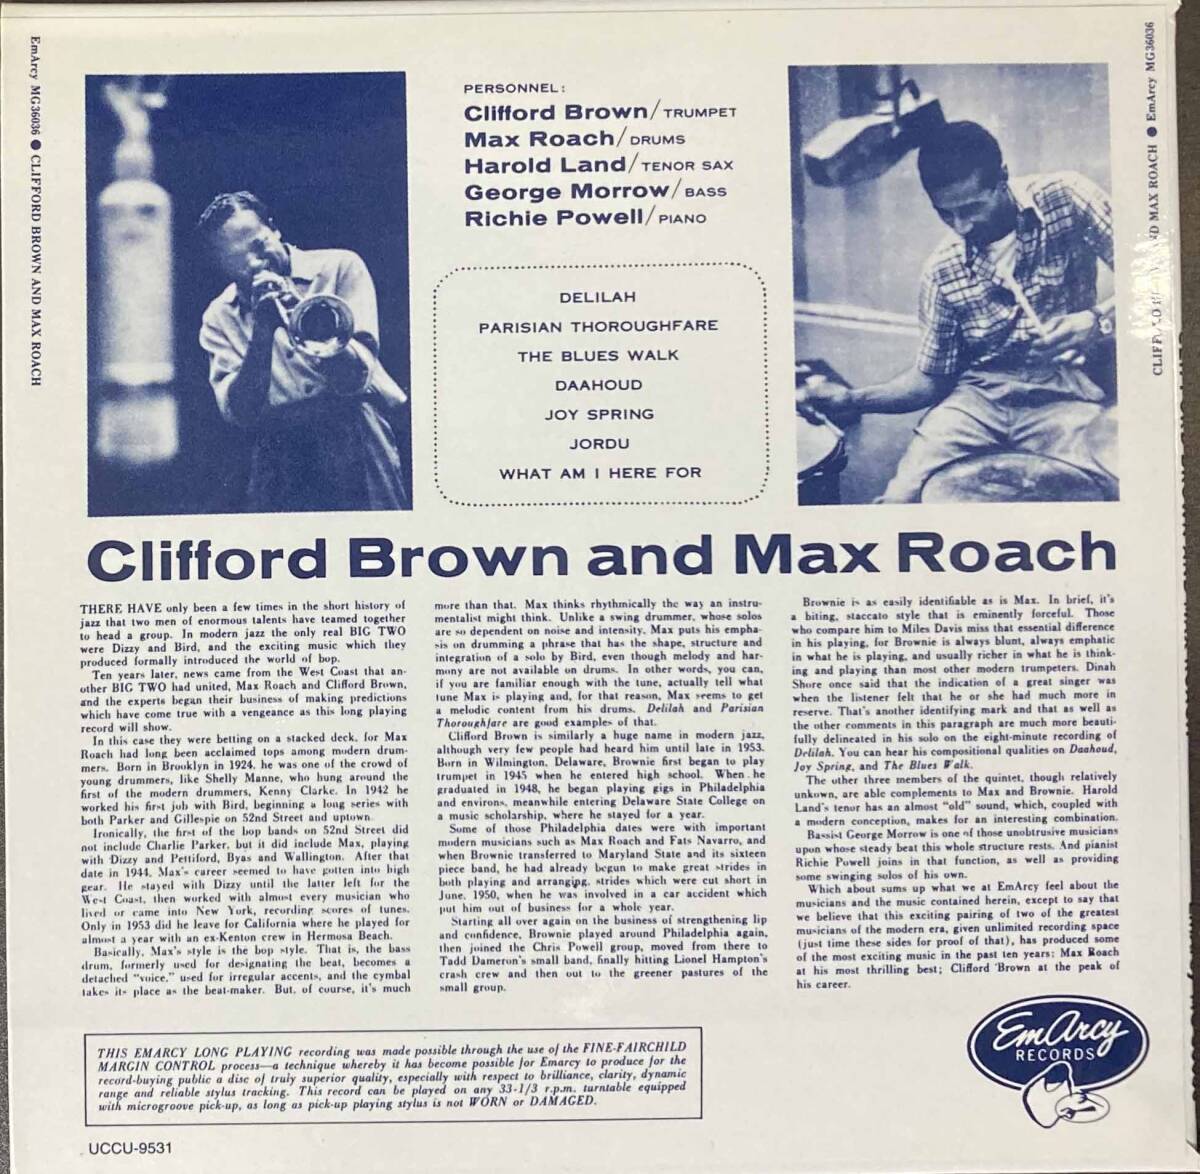 Clifford Brown & Max Roach / Clifford Brown and Max Roach 中古CD 国内盤 帯付き 紙ジャケ 24bitリマスタリング 初回プレス完全限定盤 _画像2